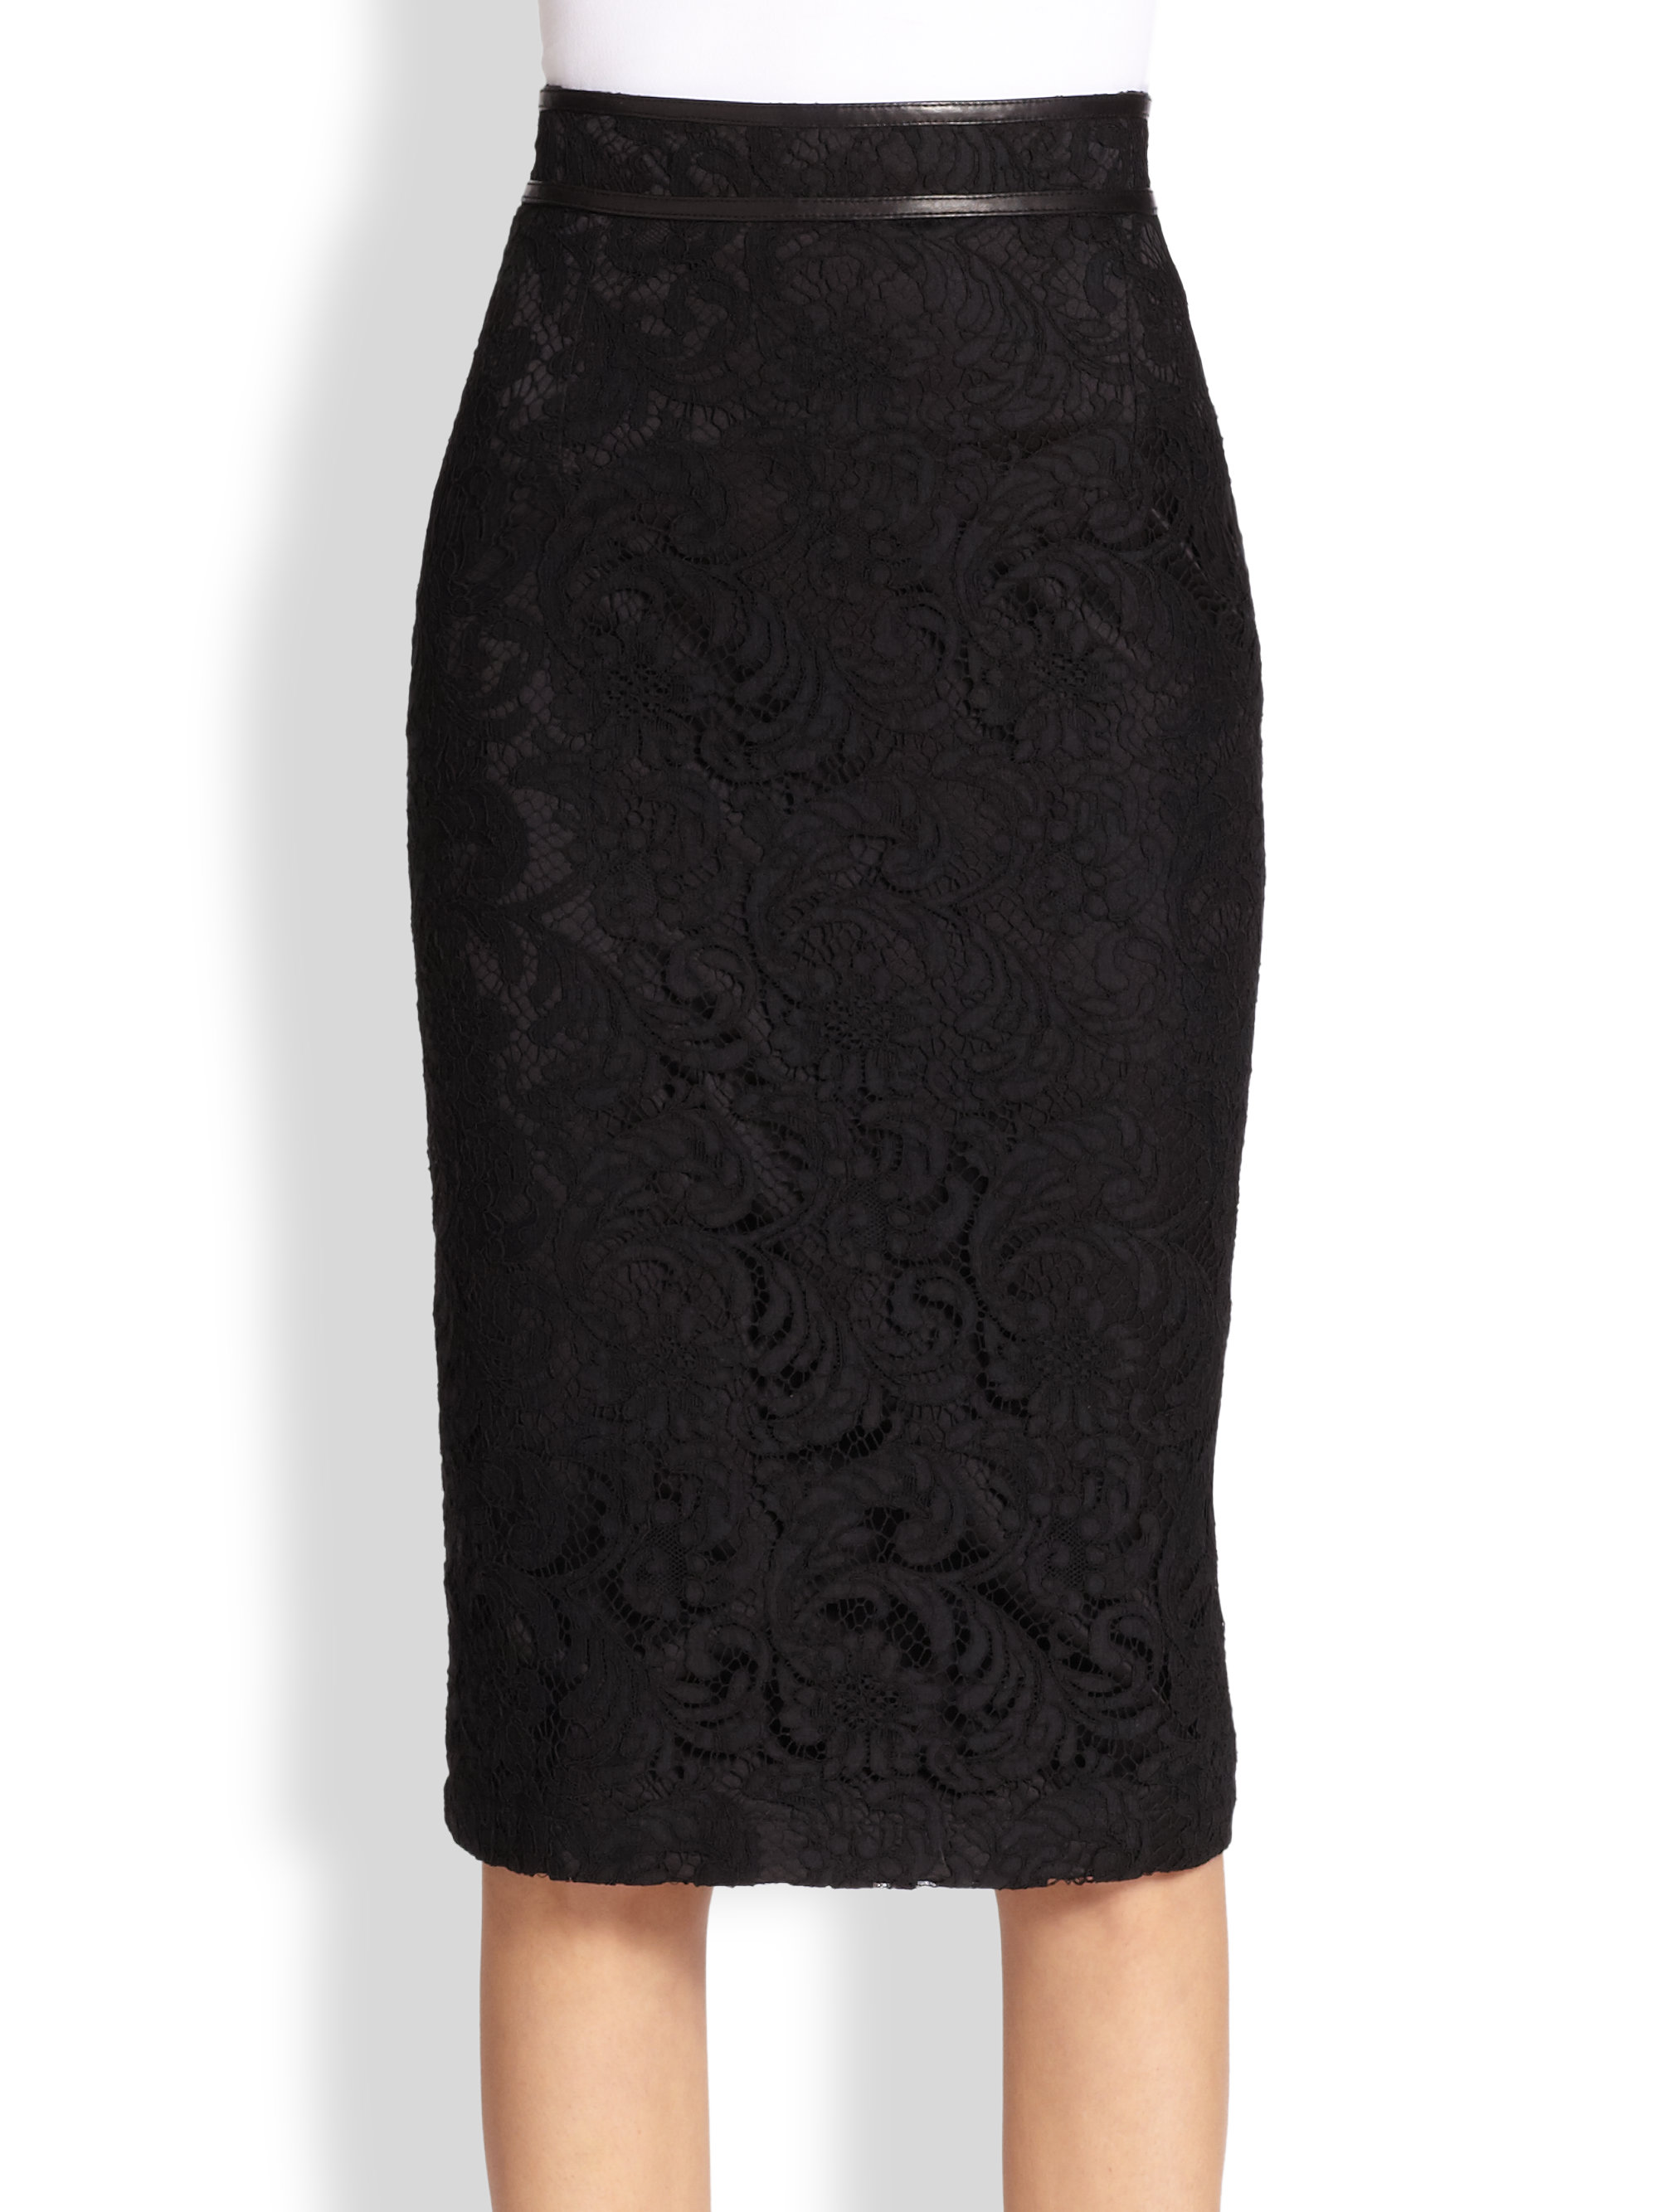 Burberry Lace Fishtail Pencil Skirt in Black - Lyst